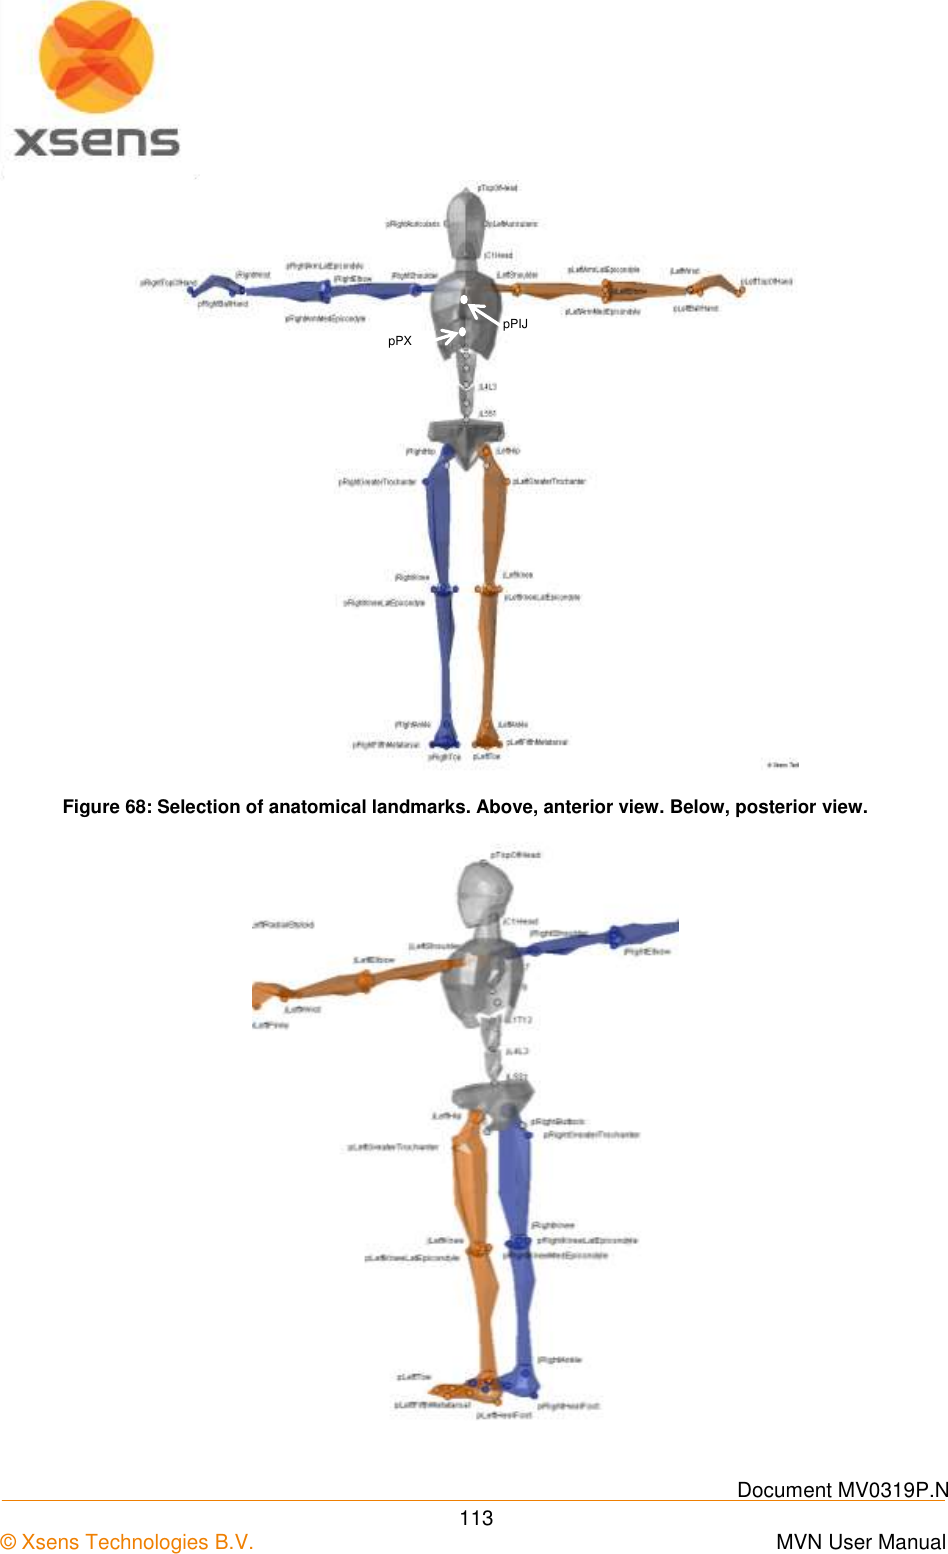    Document MV0319P.N © Xsens Technologies B.V.      MVN User Manual  113  Figure 68: Selection of anatomical landmarks. Above, anterior view. Below, posterior view.  pPIJ pPX 